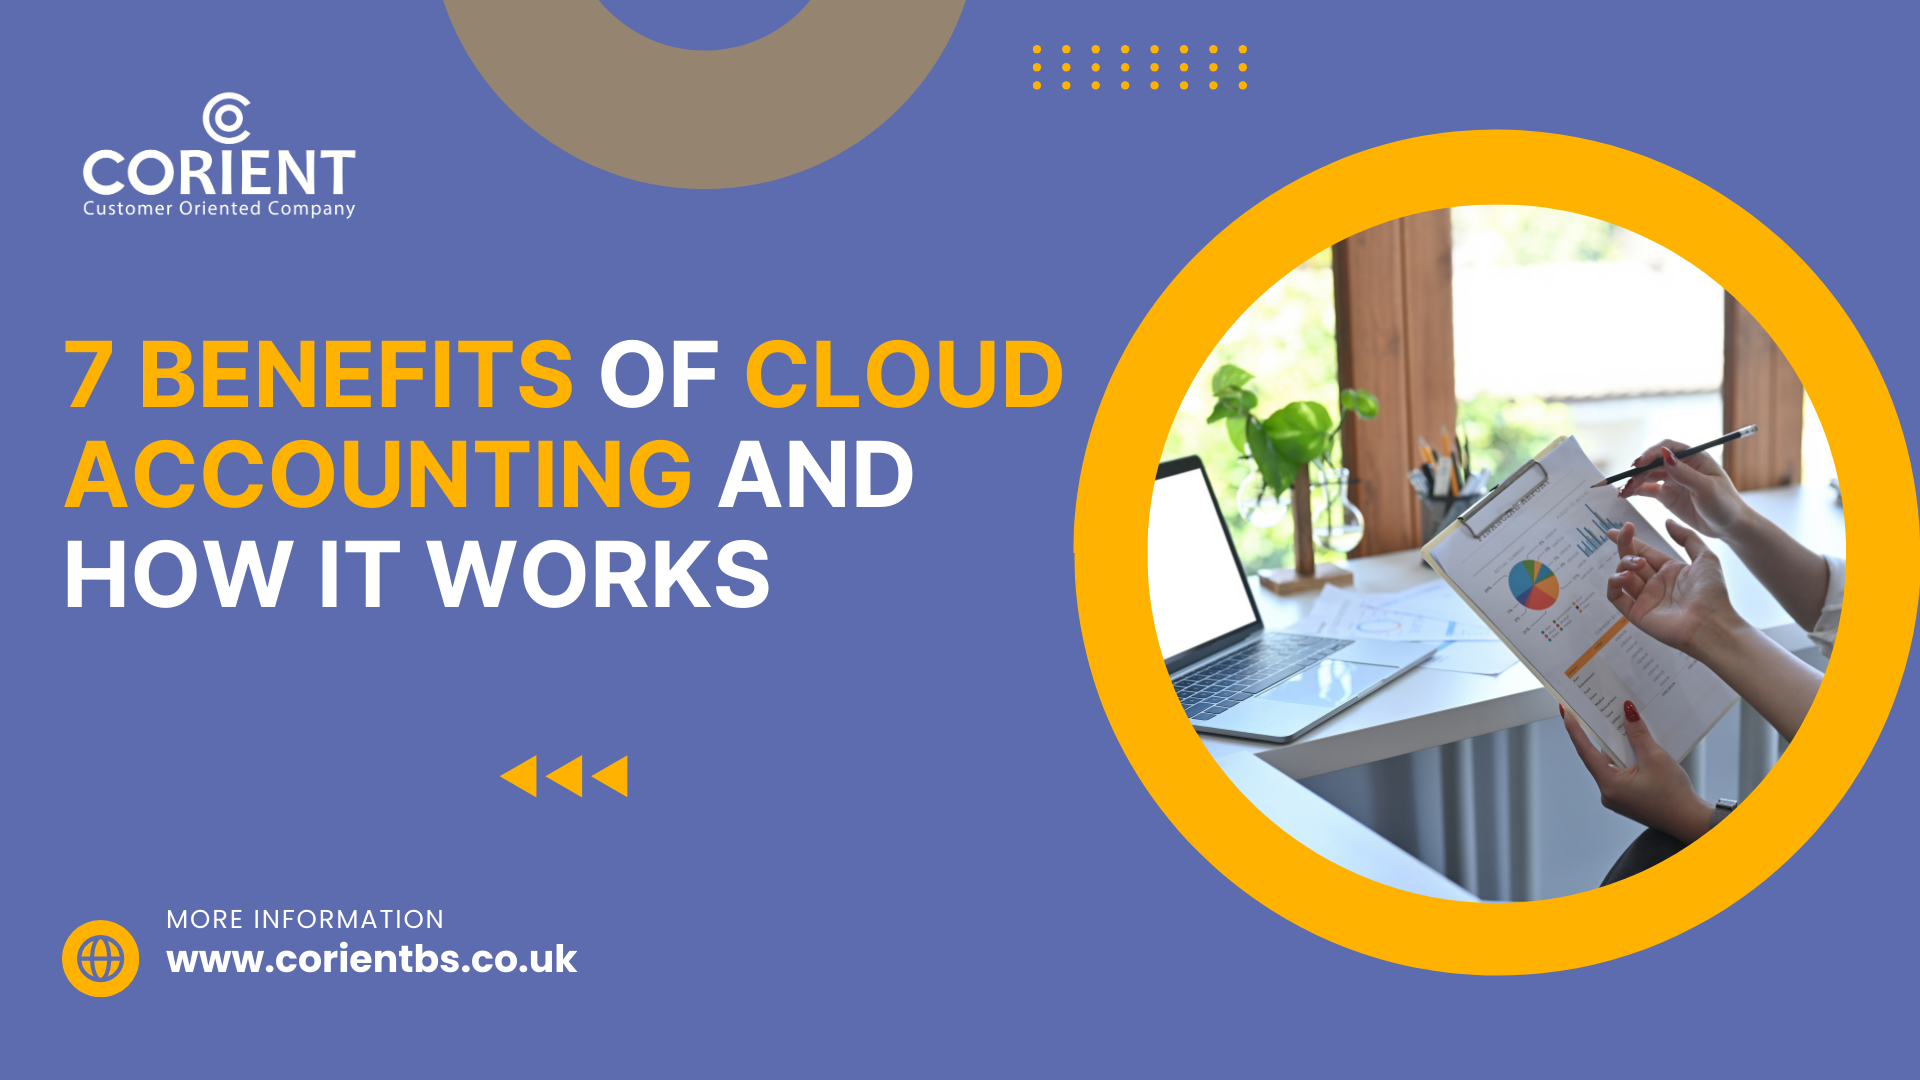 7 Benefits of Cloud Accounting and How It Works